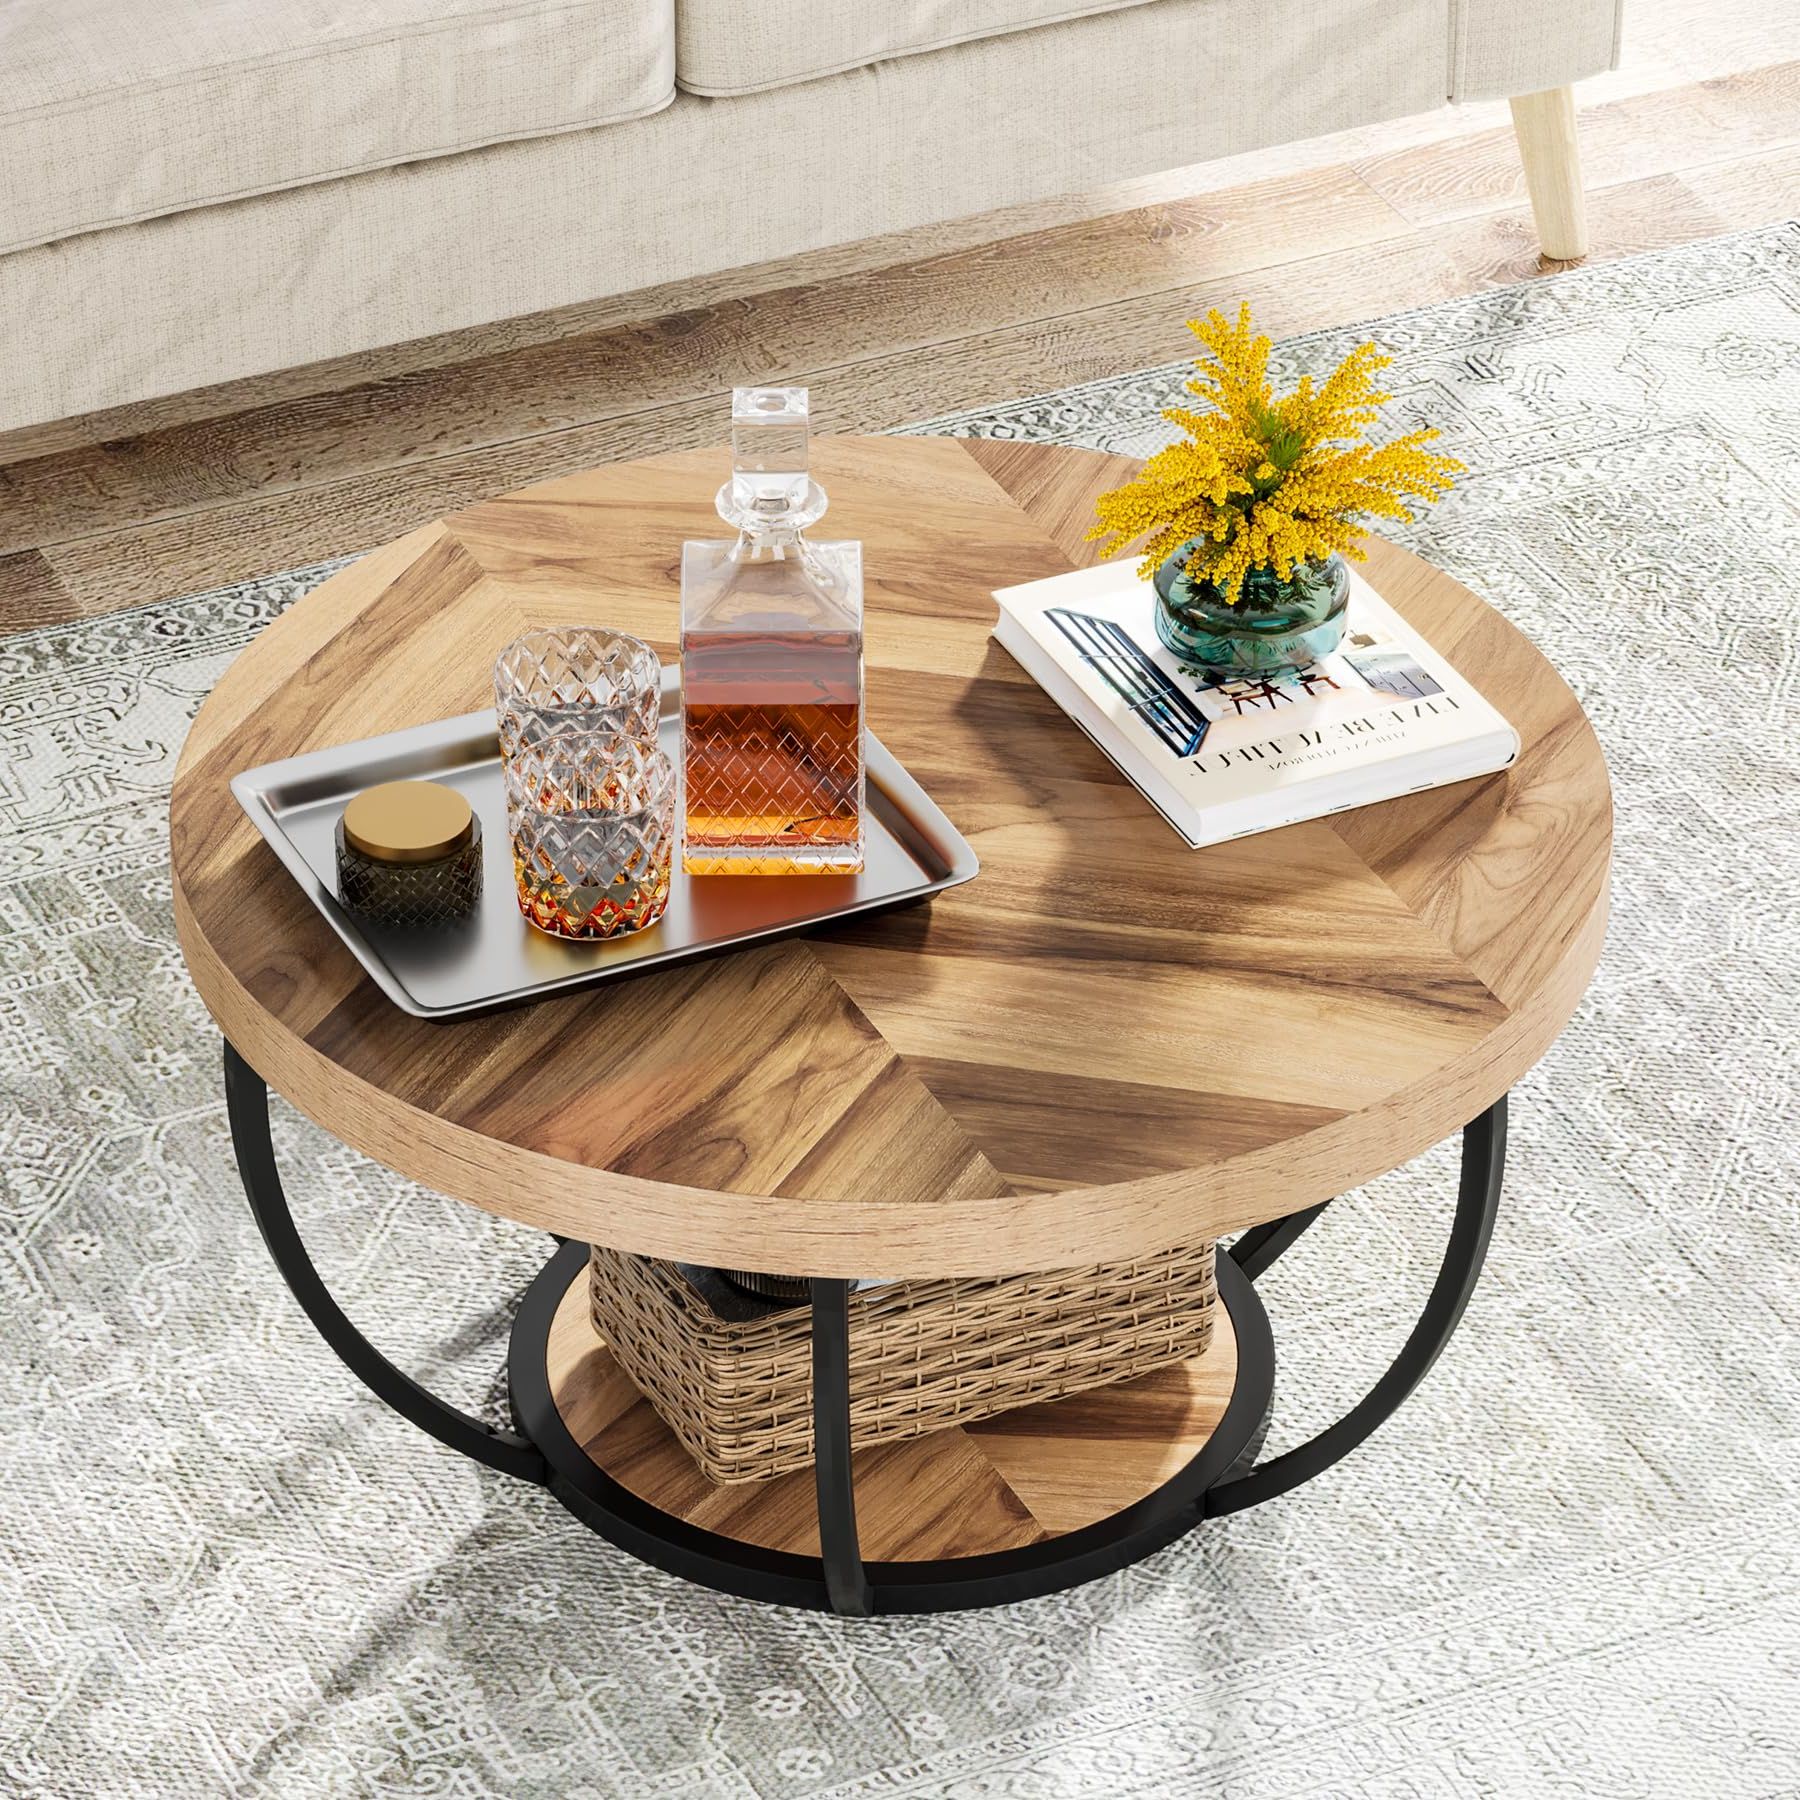 Most Current Amazon: Tribesigns Round Coffee Table, Modern 2 Tier Center Table With  Storage Open Shelves, Wooden Circle Coffee Table Sofa Side Table With Metal  Legs For Living Room, Wooden Grain And Black : Home Throughout Wood Coffee Tables With 2 Tier Storage (View 3 of 10)